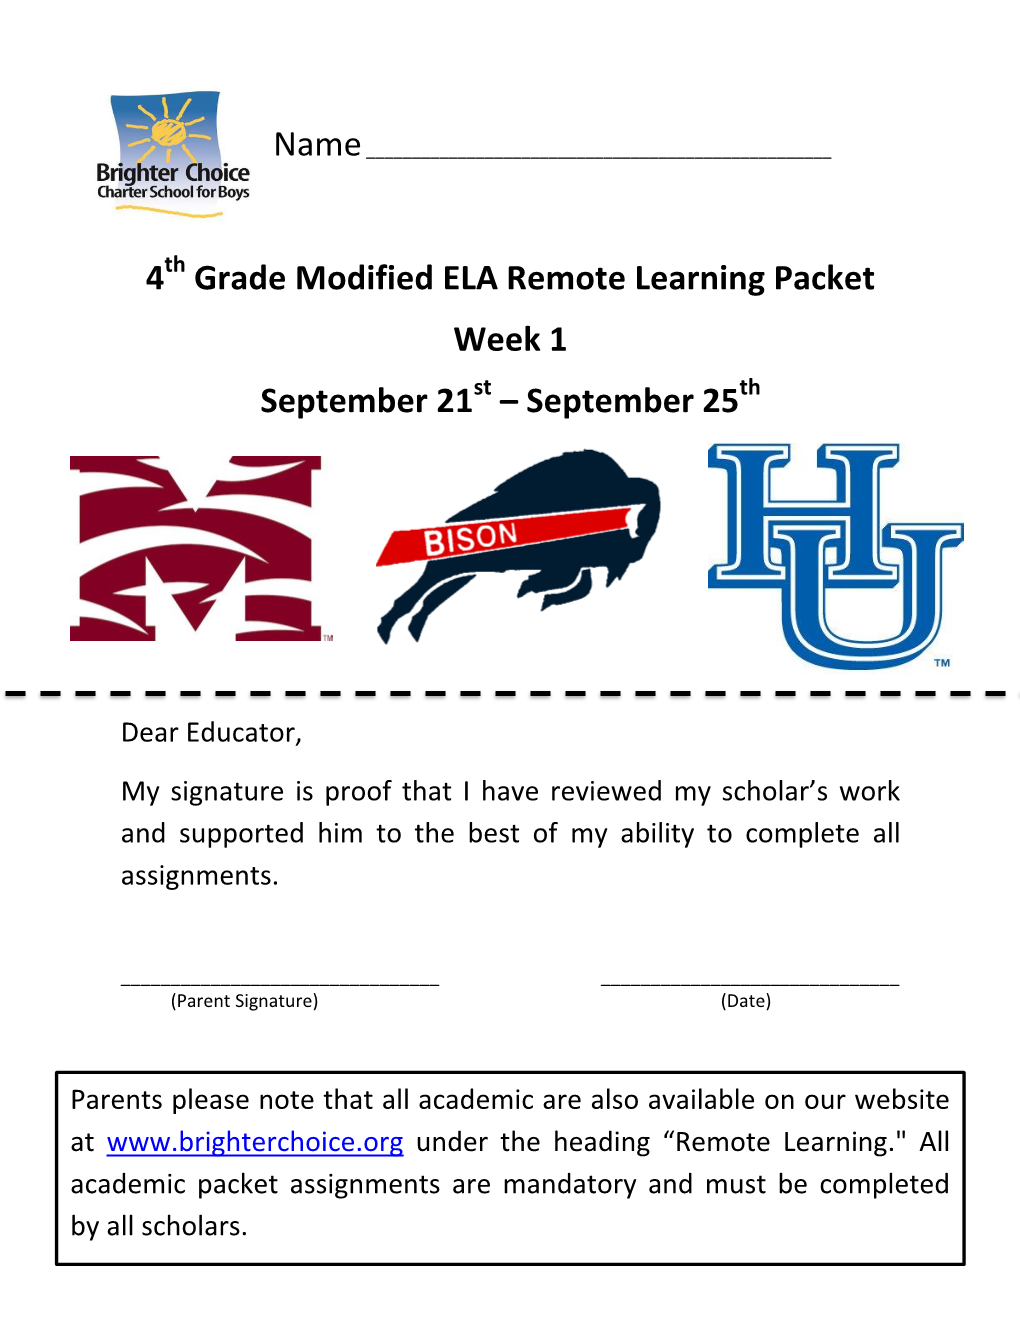 4 Grade Modified ELA Remote Learning Packet Week 1